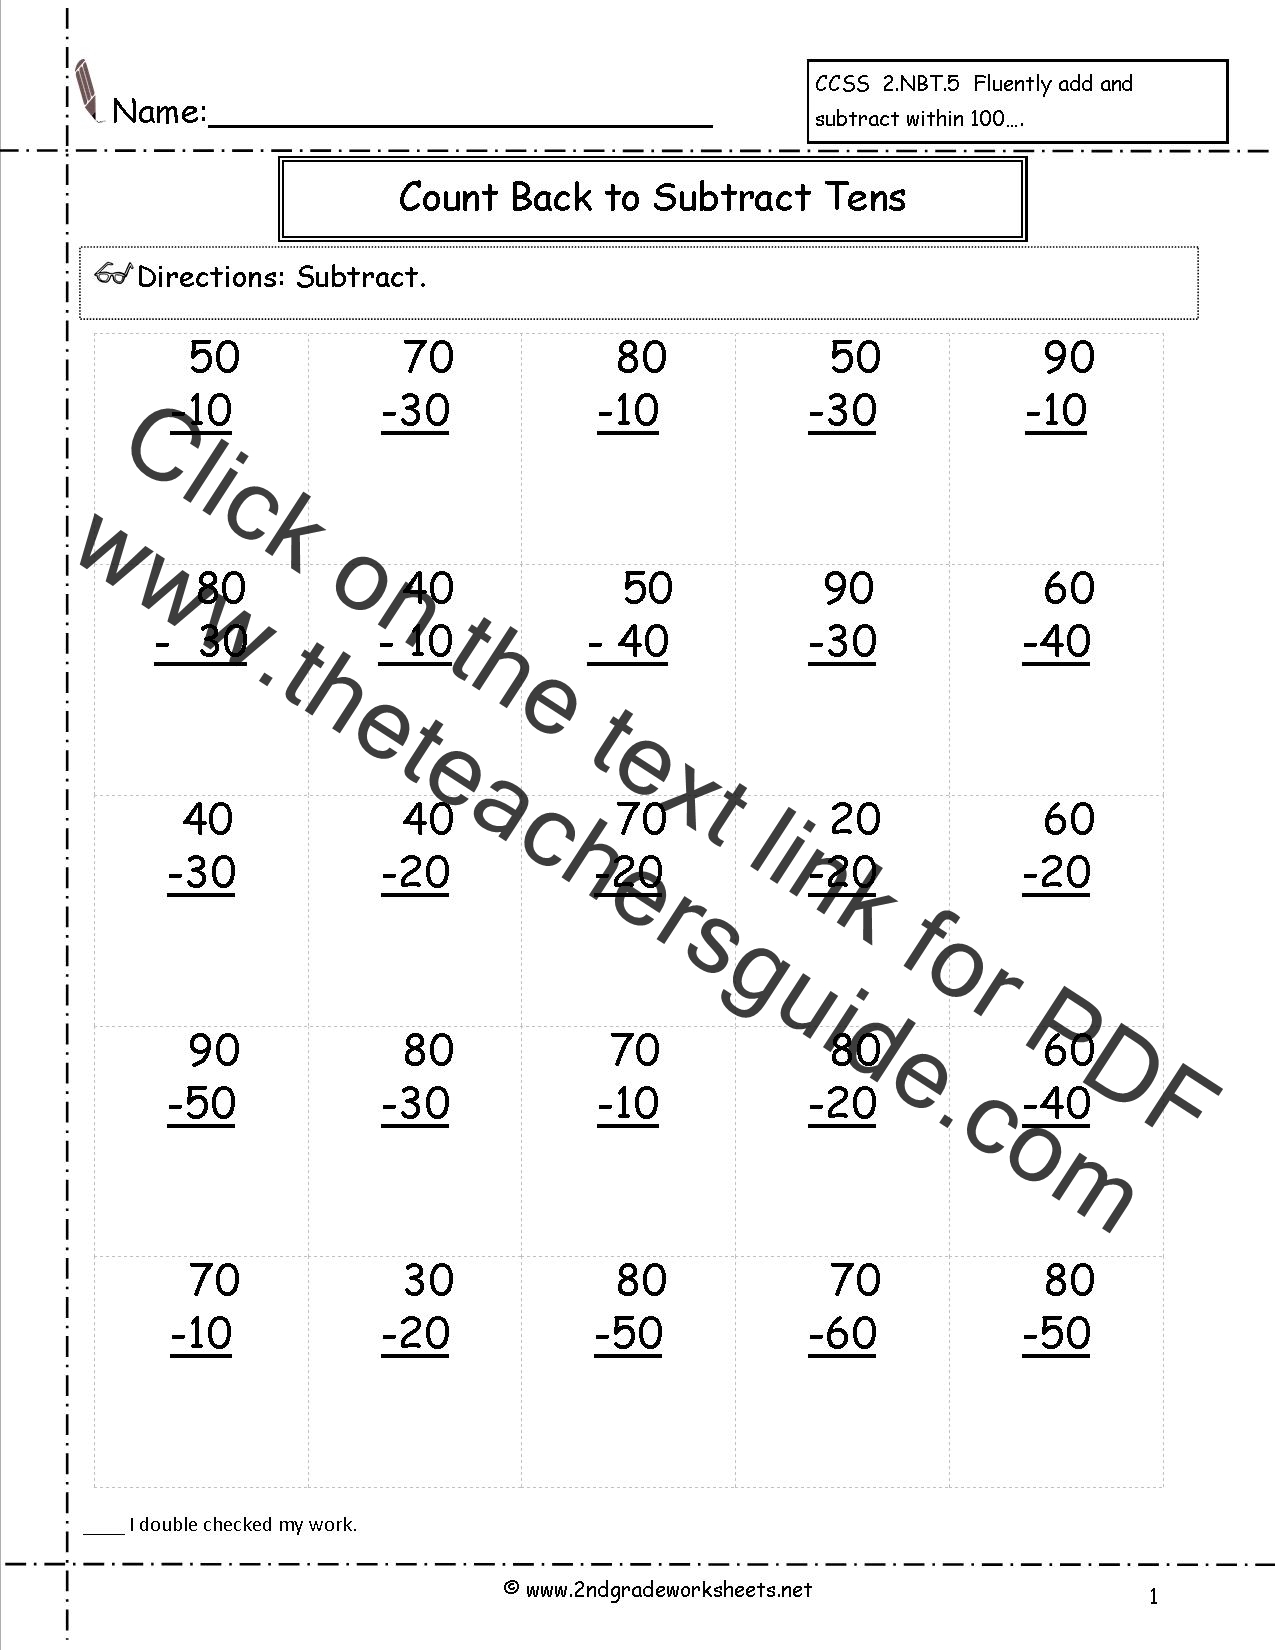 subtraction-facts-one-to-ten-worksheets-math-subtraction-2nd-grade